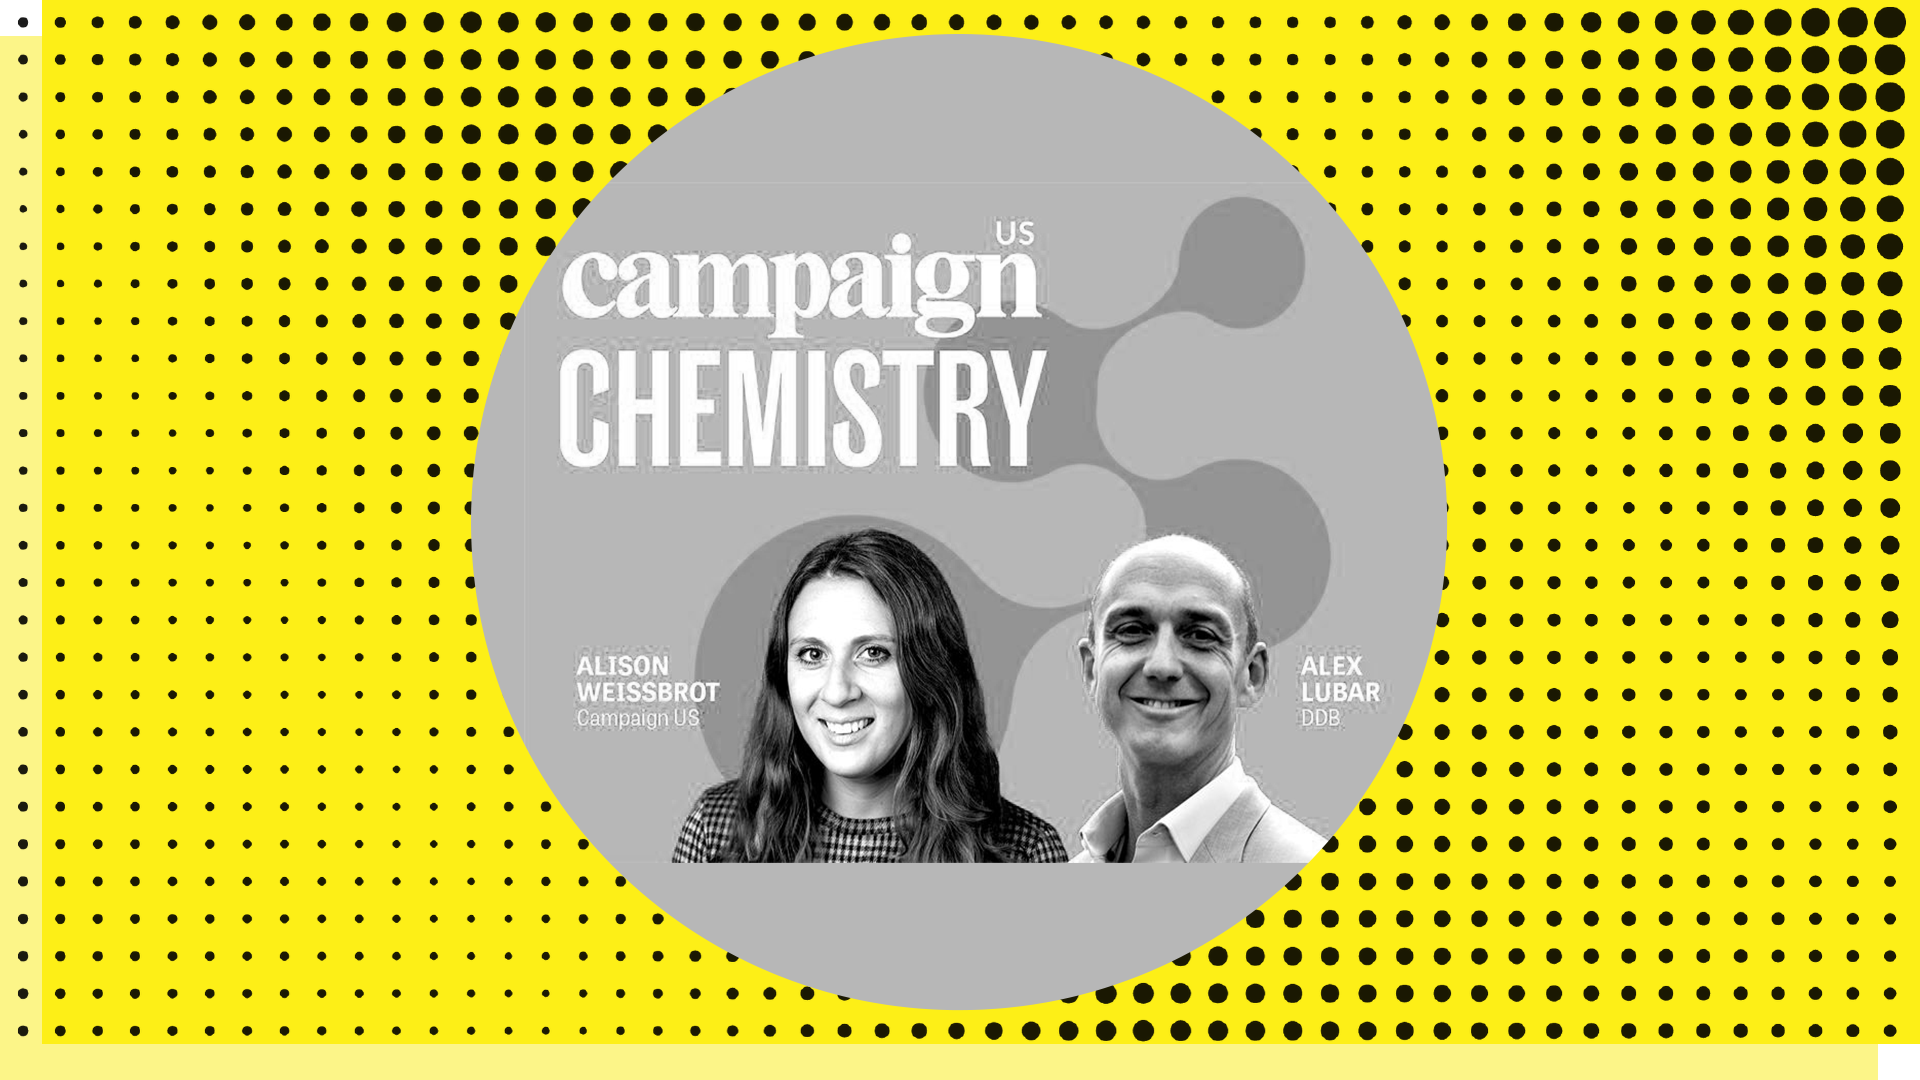 Alex Lubar featured on Campaign Chemistry